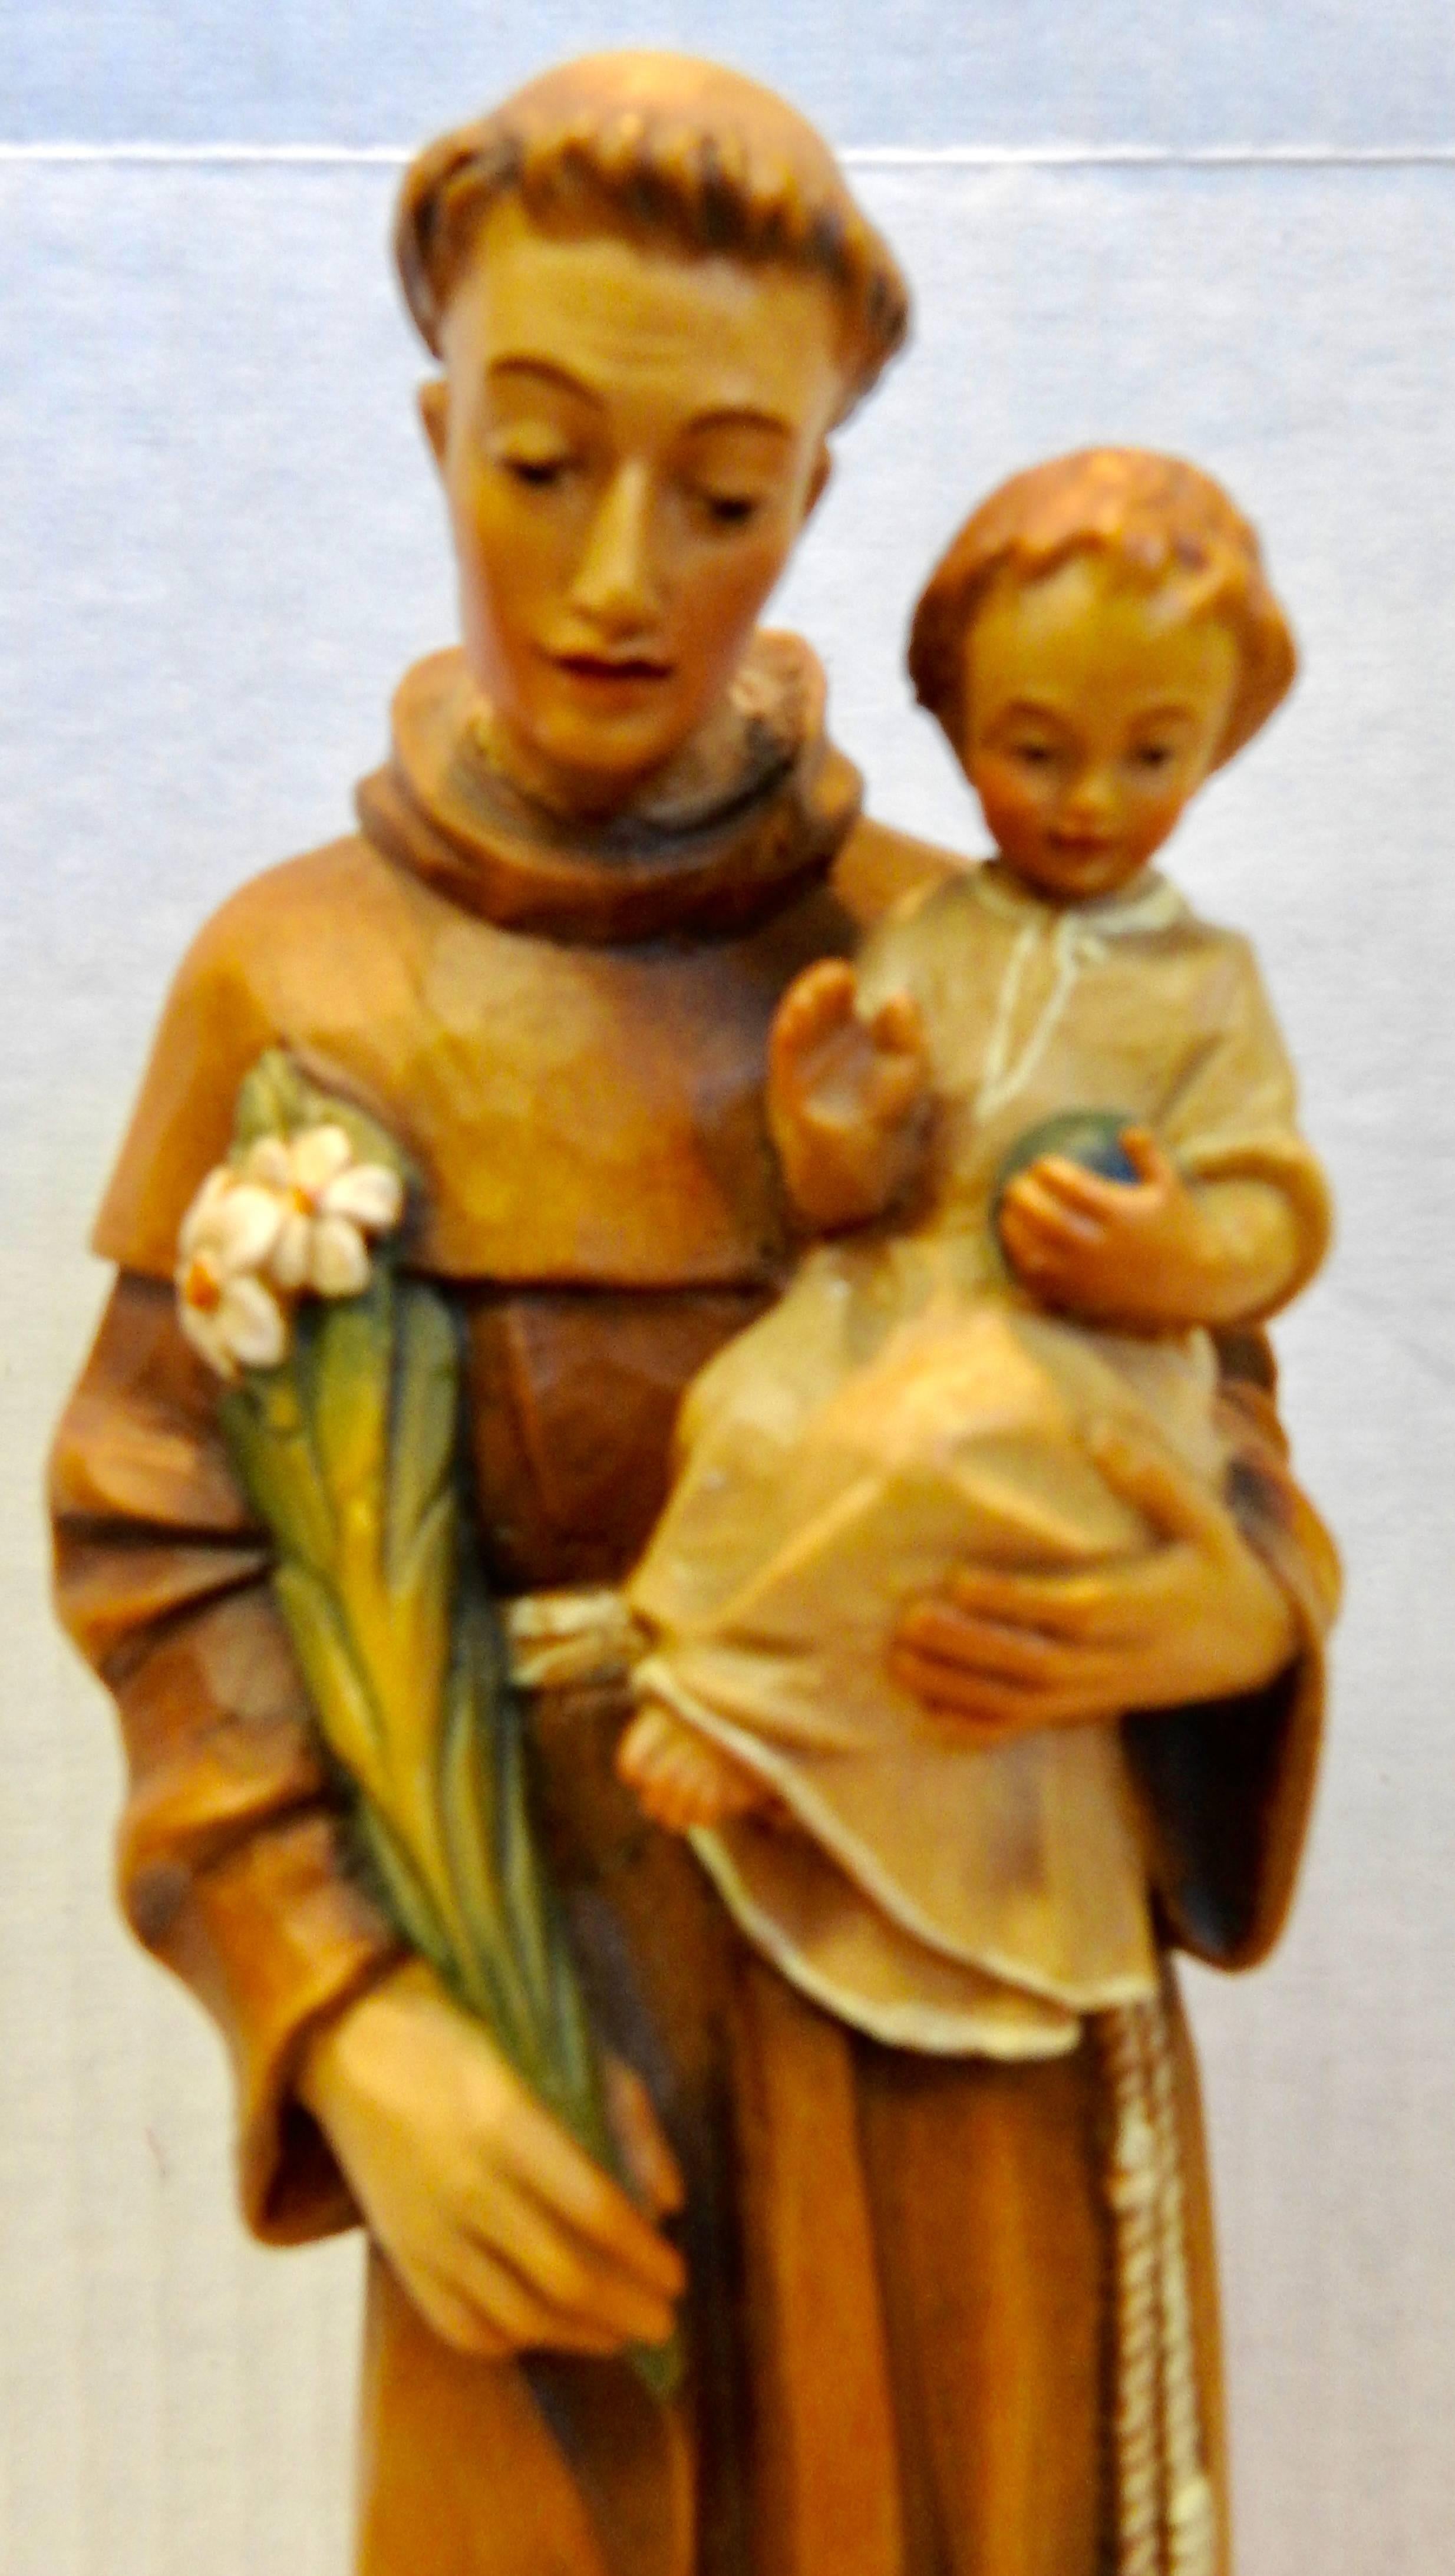 The faces on this hand carved figurine will make you love them. St. Anthony is holding the Christ Child and stems of flowers. It is painted is soft colors to add to the beautiful details. The piece is marked on the bottom, ANRI and Italy.